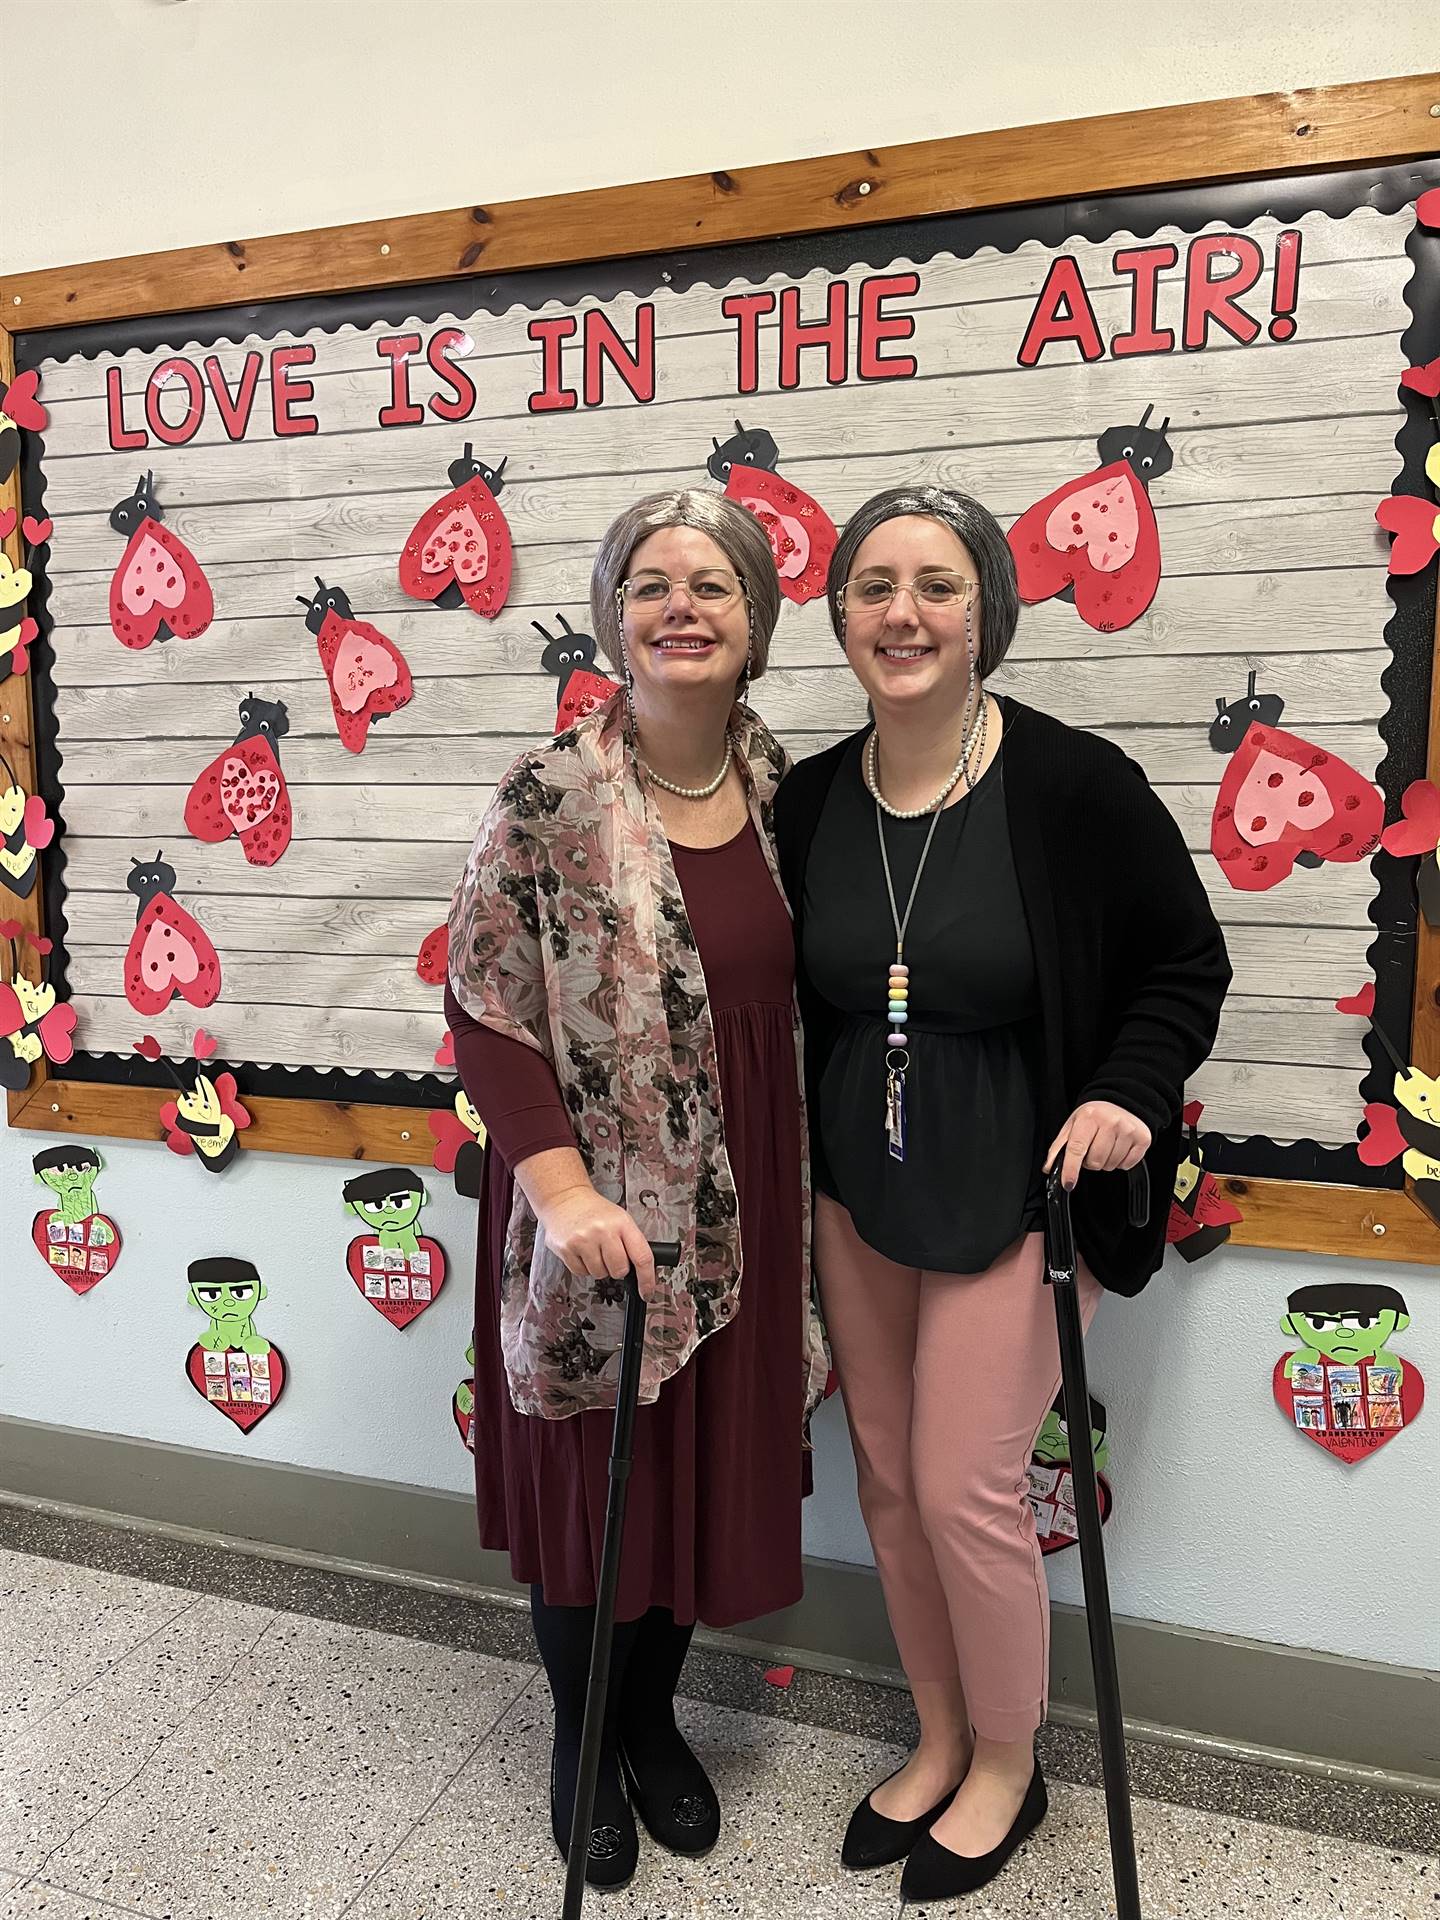 2 teachers dressed as 100 year olds complete with canes and a heart background